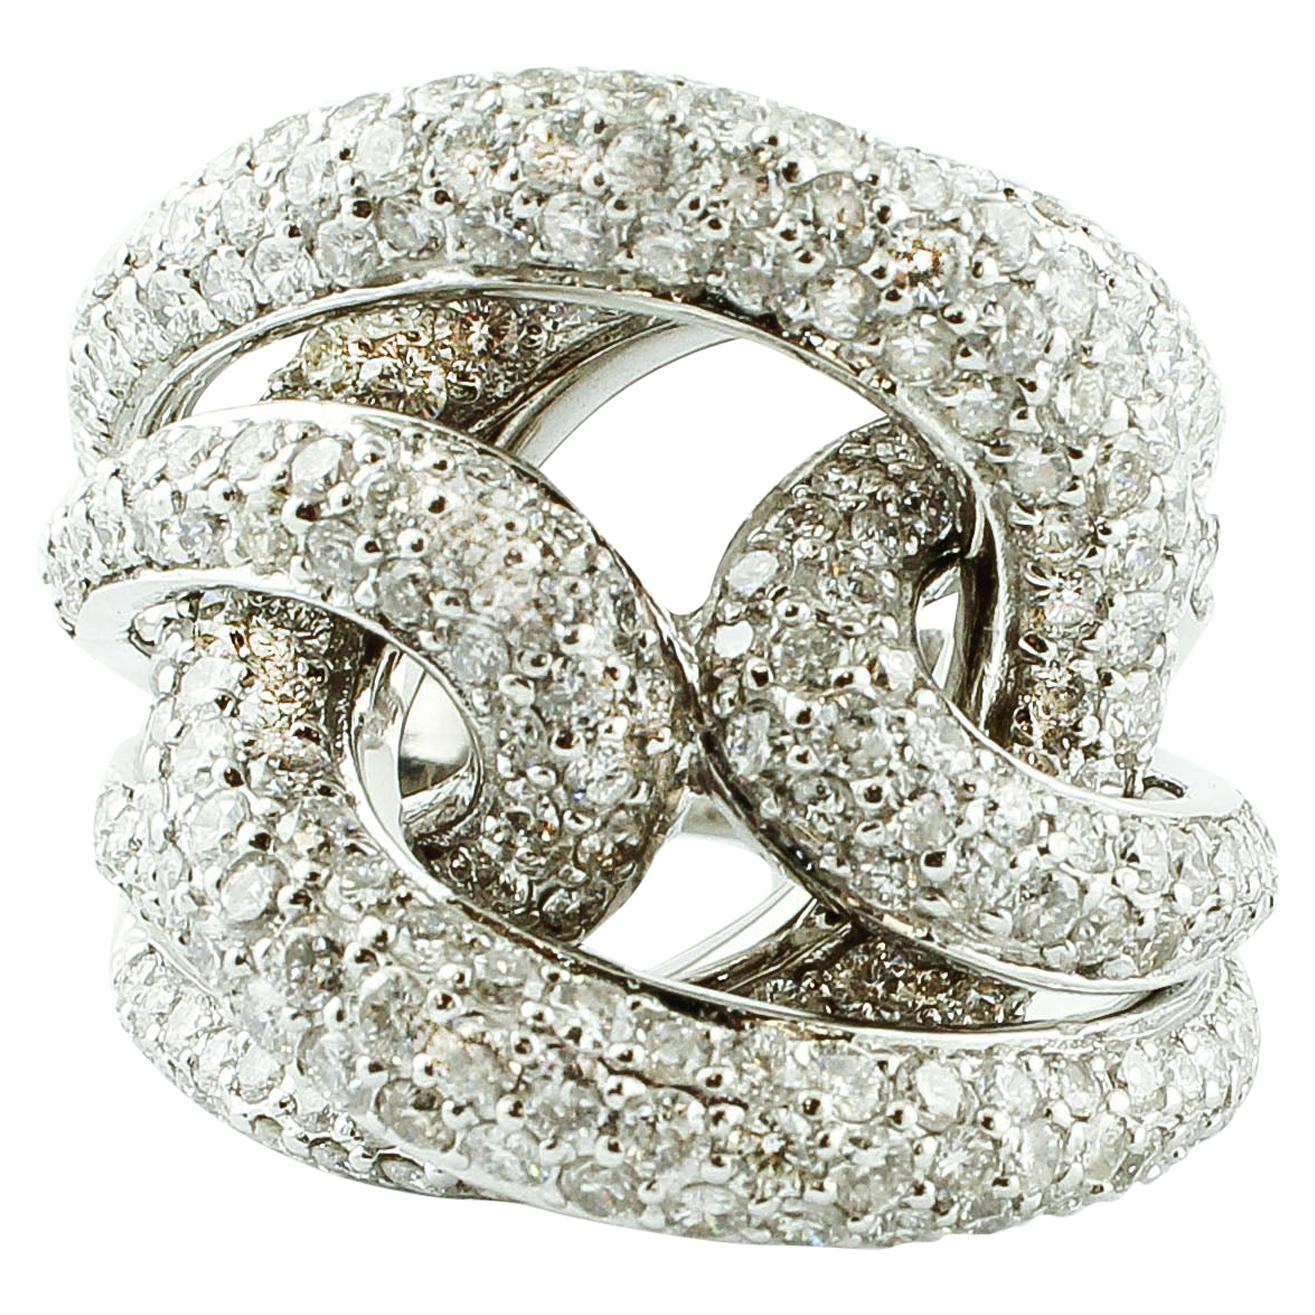 Diamonds and 18 Karat White Gold Intertwined Bands Ring